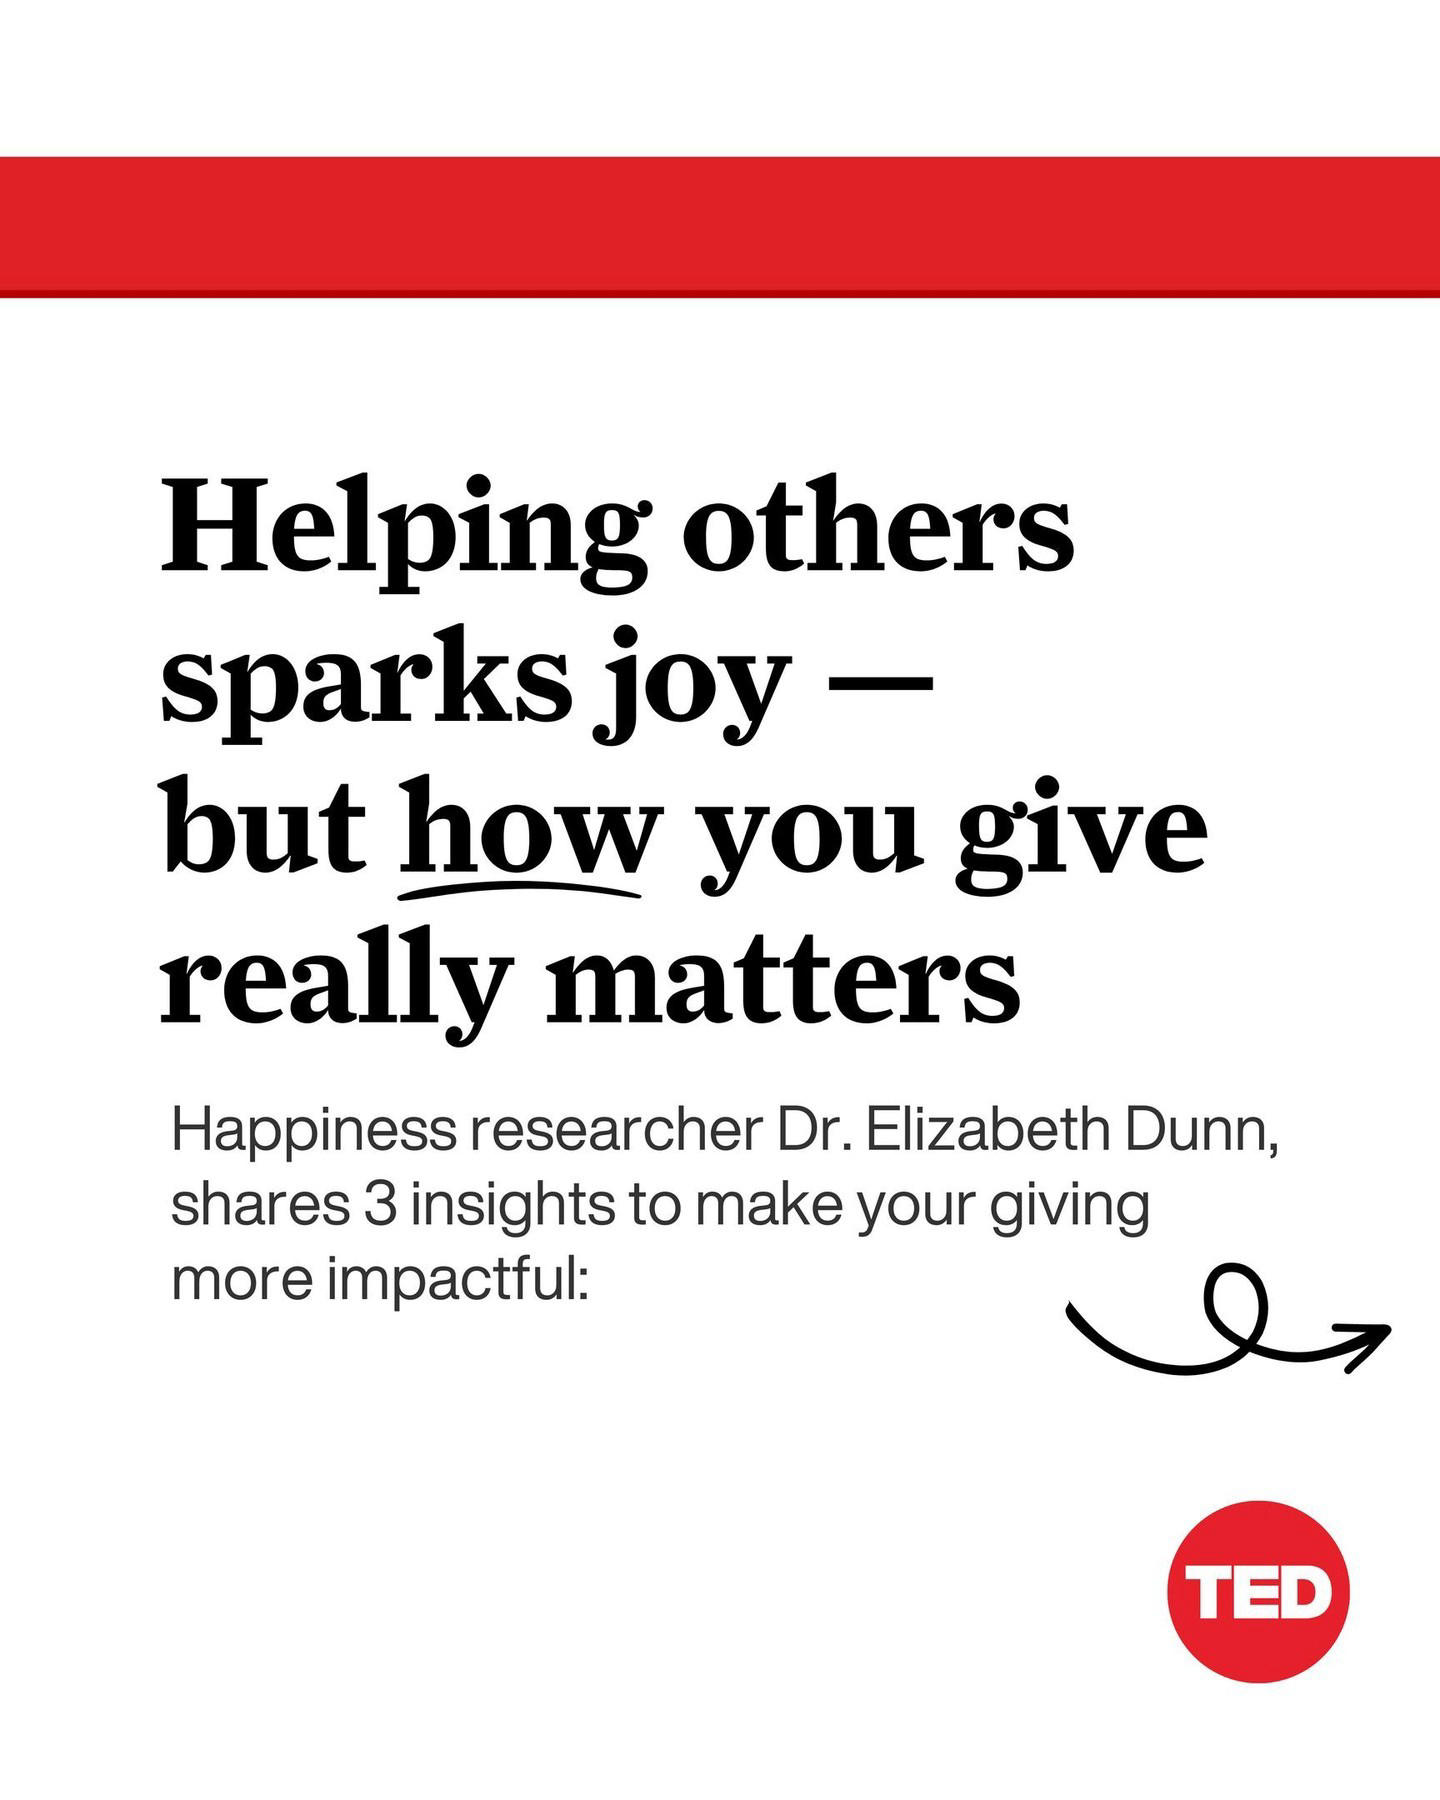 TED Talks - Do you give back to others